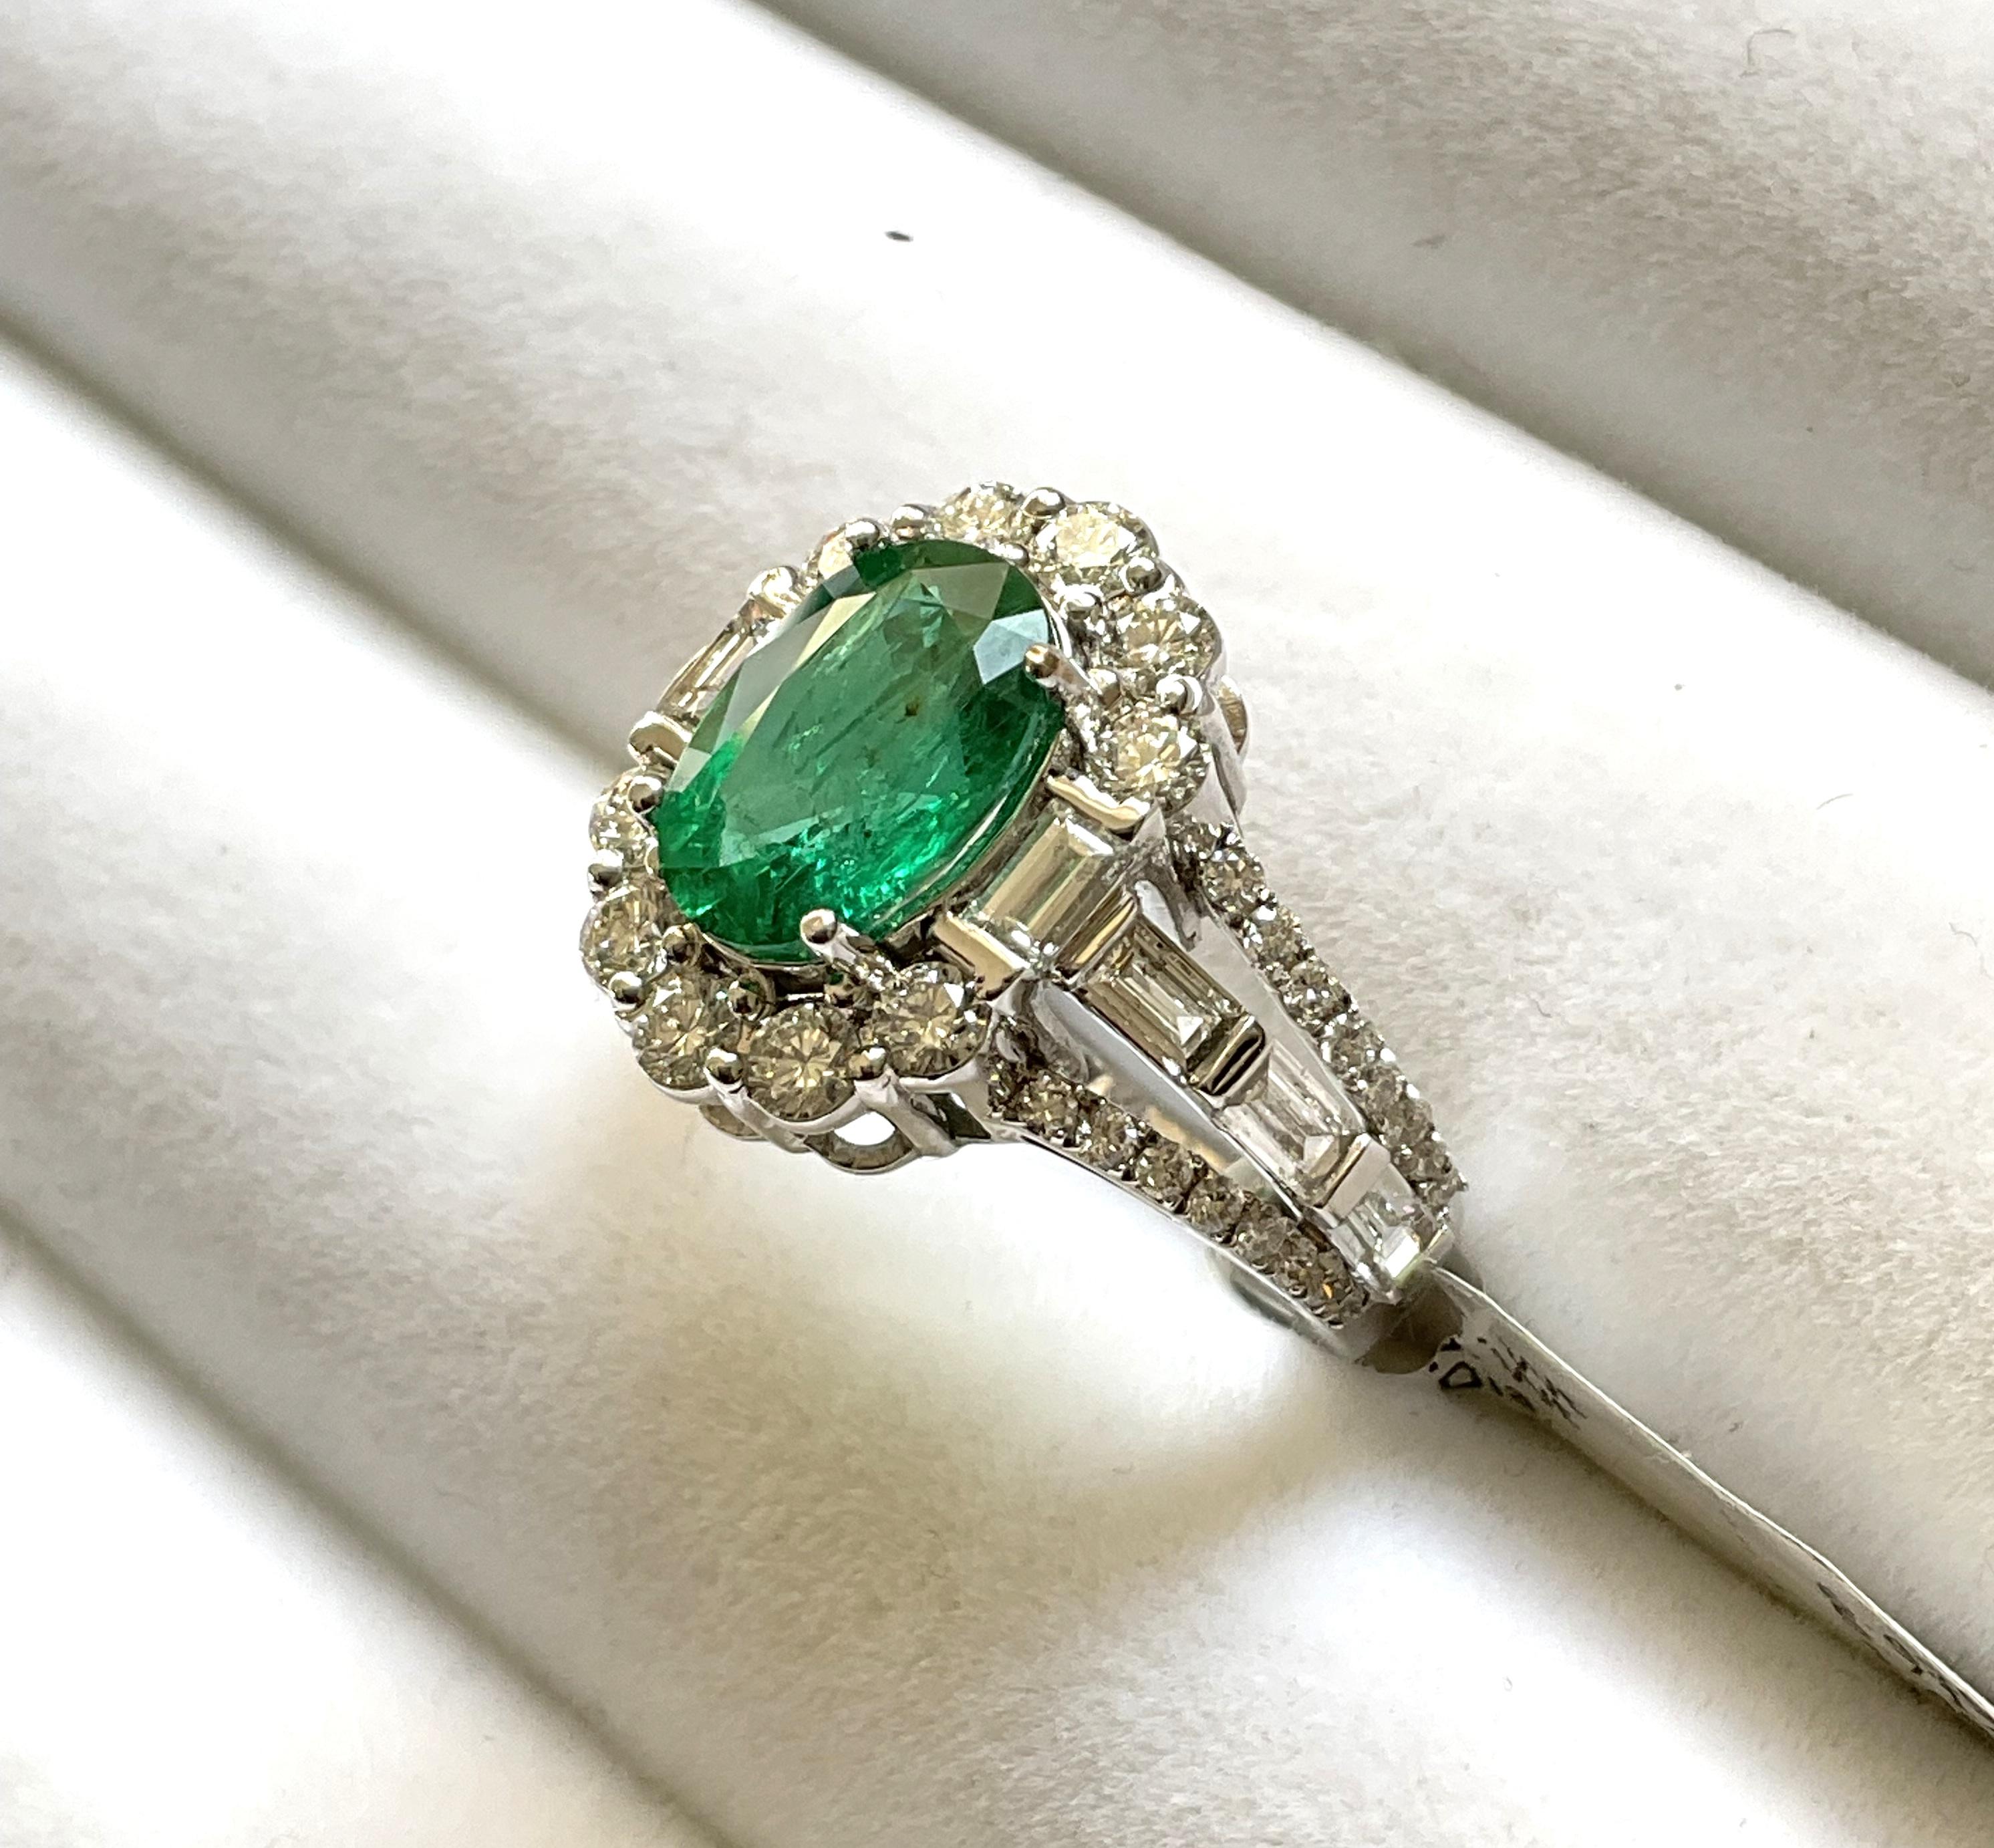 18k Gold Art Deco Zambian Emerald Cocktail Ring 2.05 cts with 1.49 ct Diamonds  For Sale 4